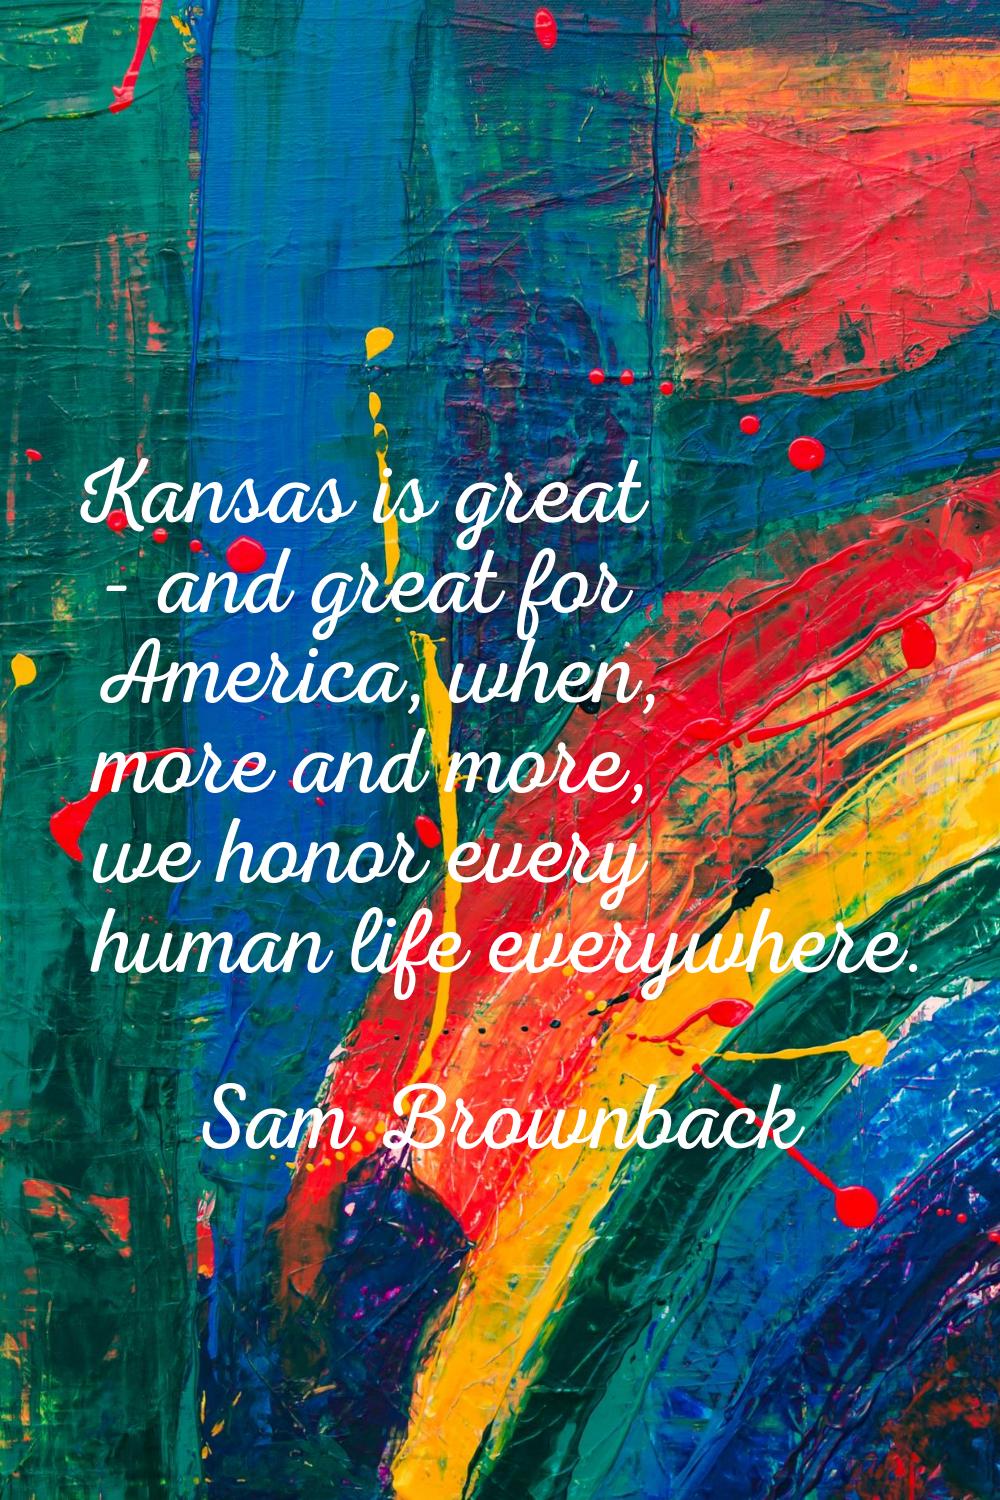 Kansas is great - and great for America, when, more and more, we honor every human life everywhere.